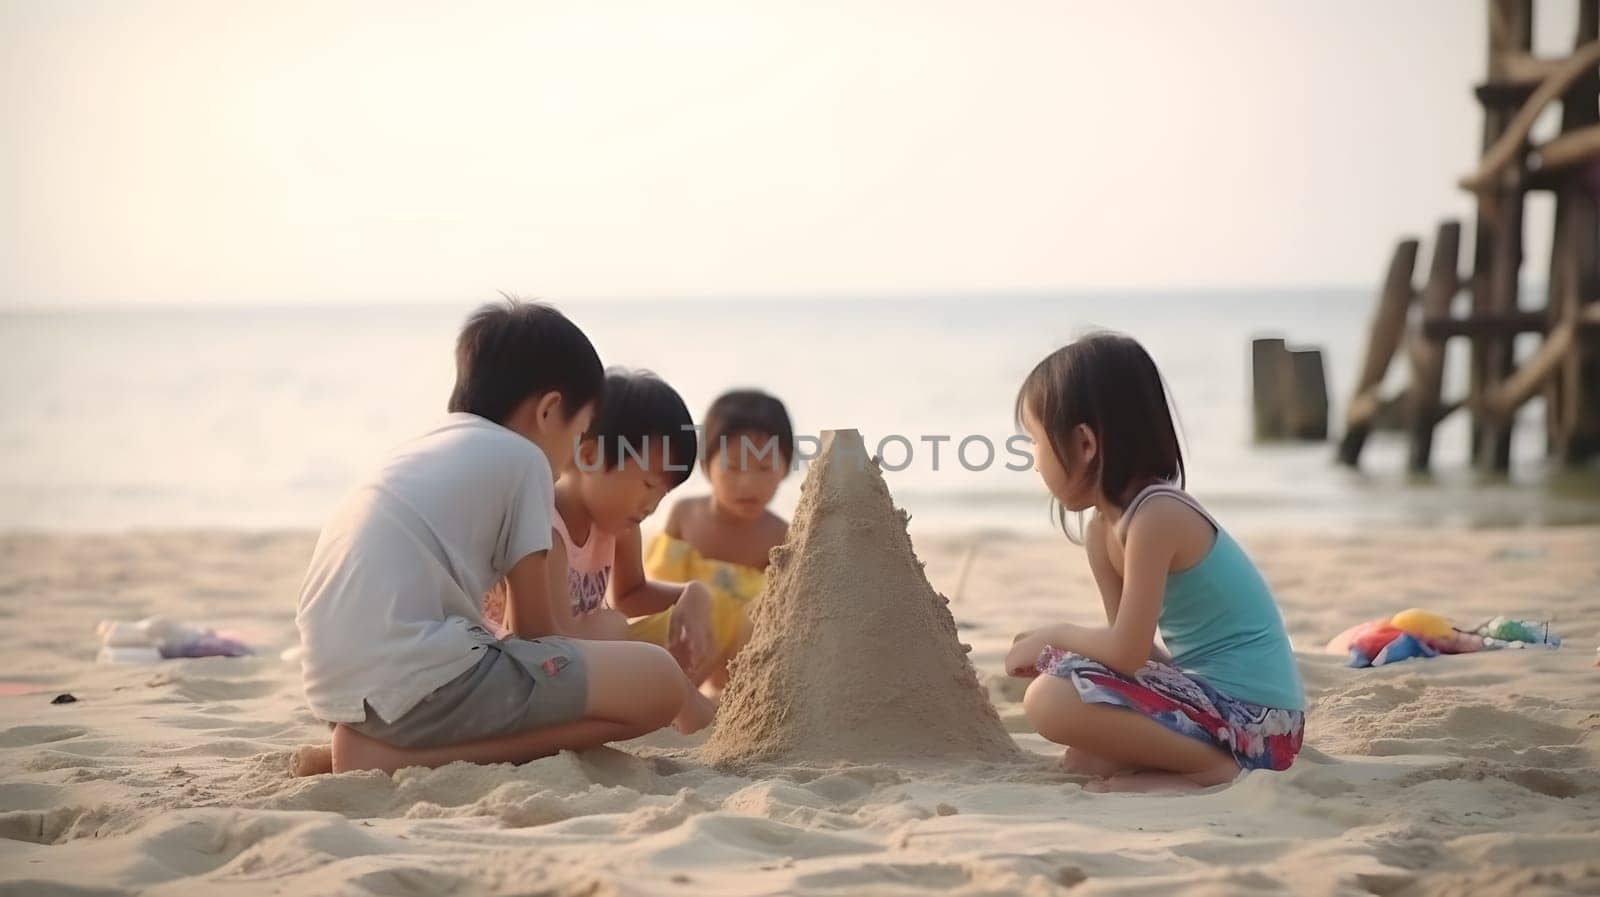 Asian children making sand castles on the beach. Neural network generated in May 2023. Not based on any actual person, scene or pattern.